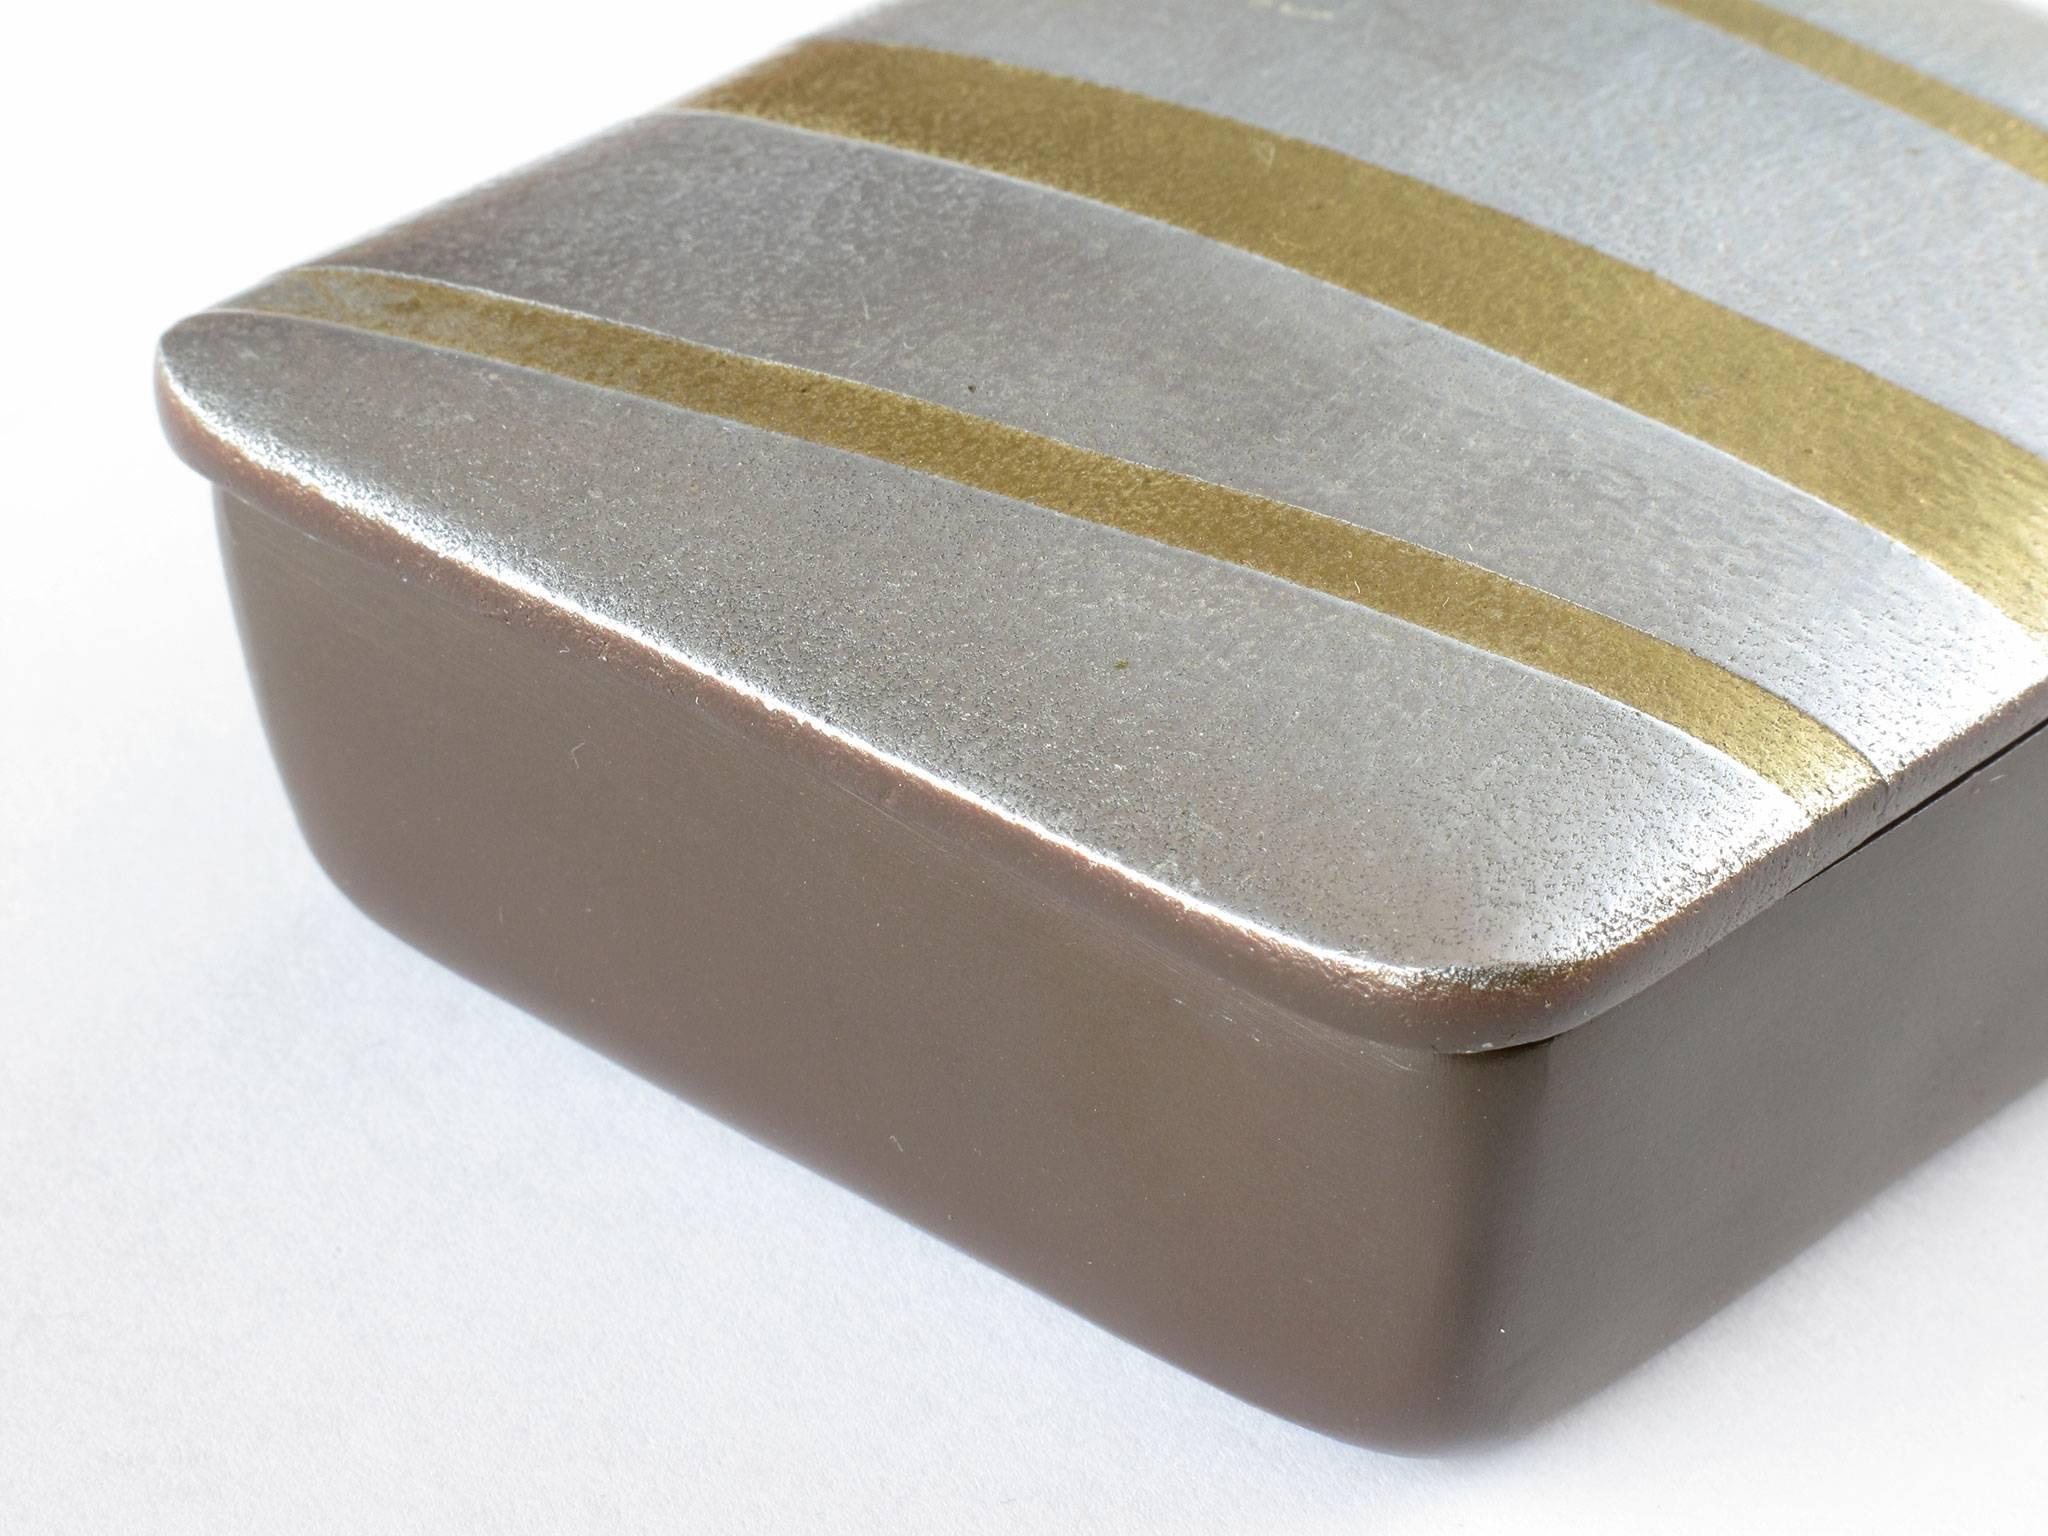 American Rare Ben Seibel Silver and Gold Box with Lid and Cork Lined Interior, 1950s For Sale